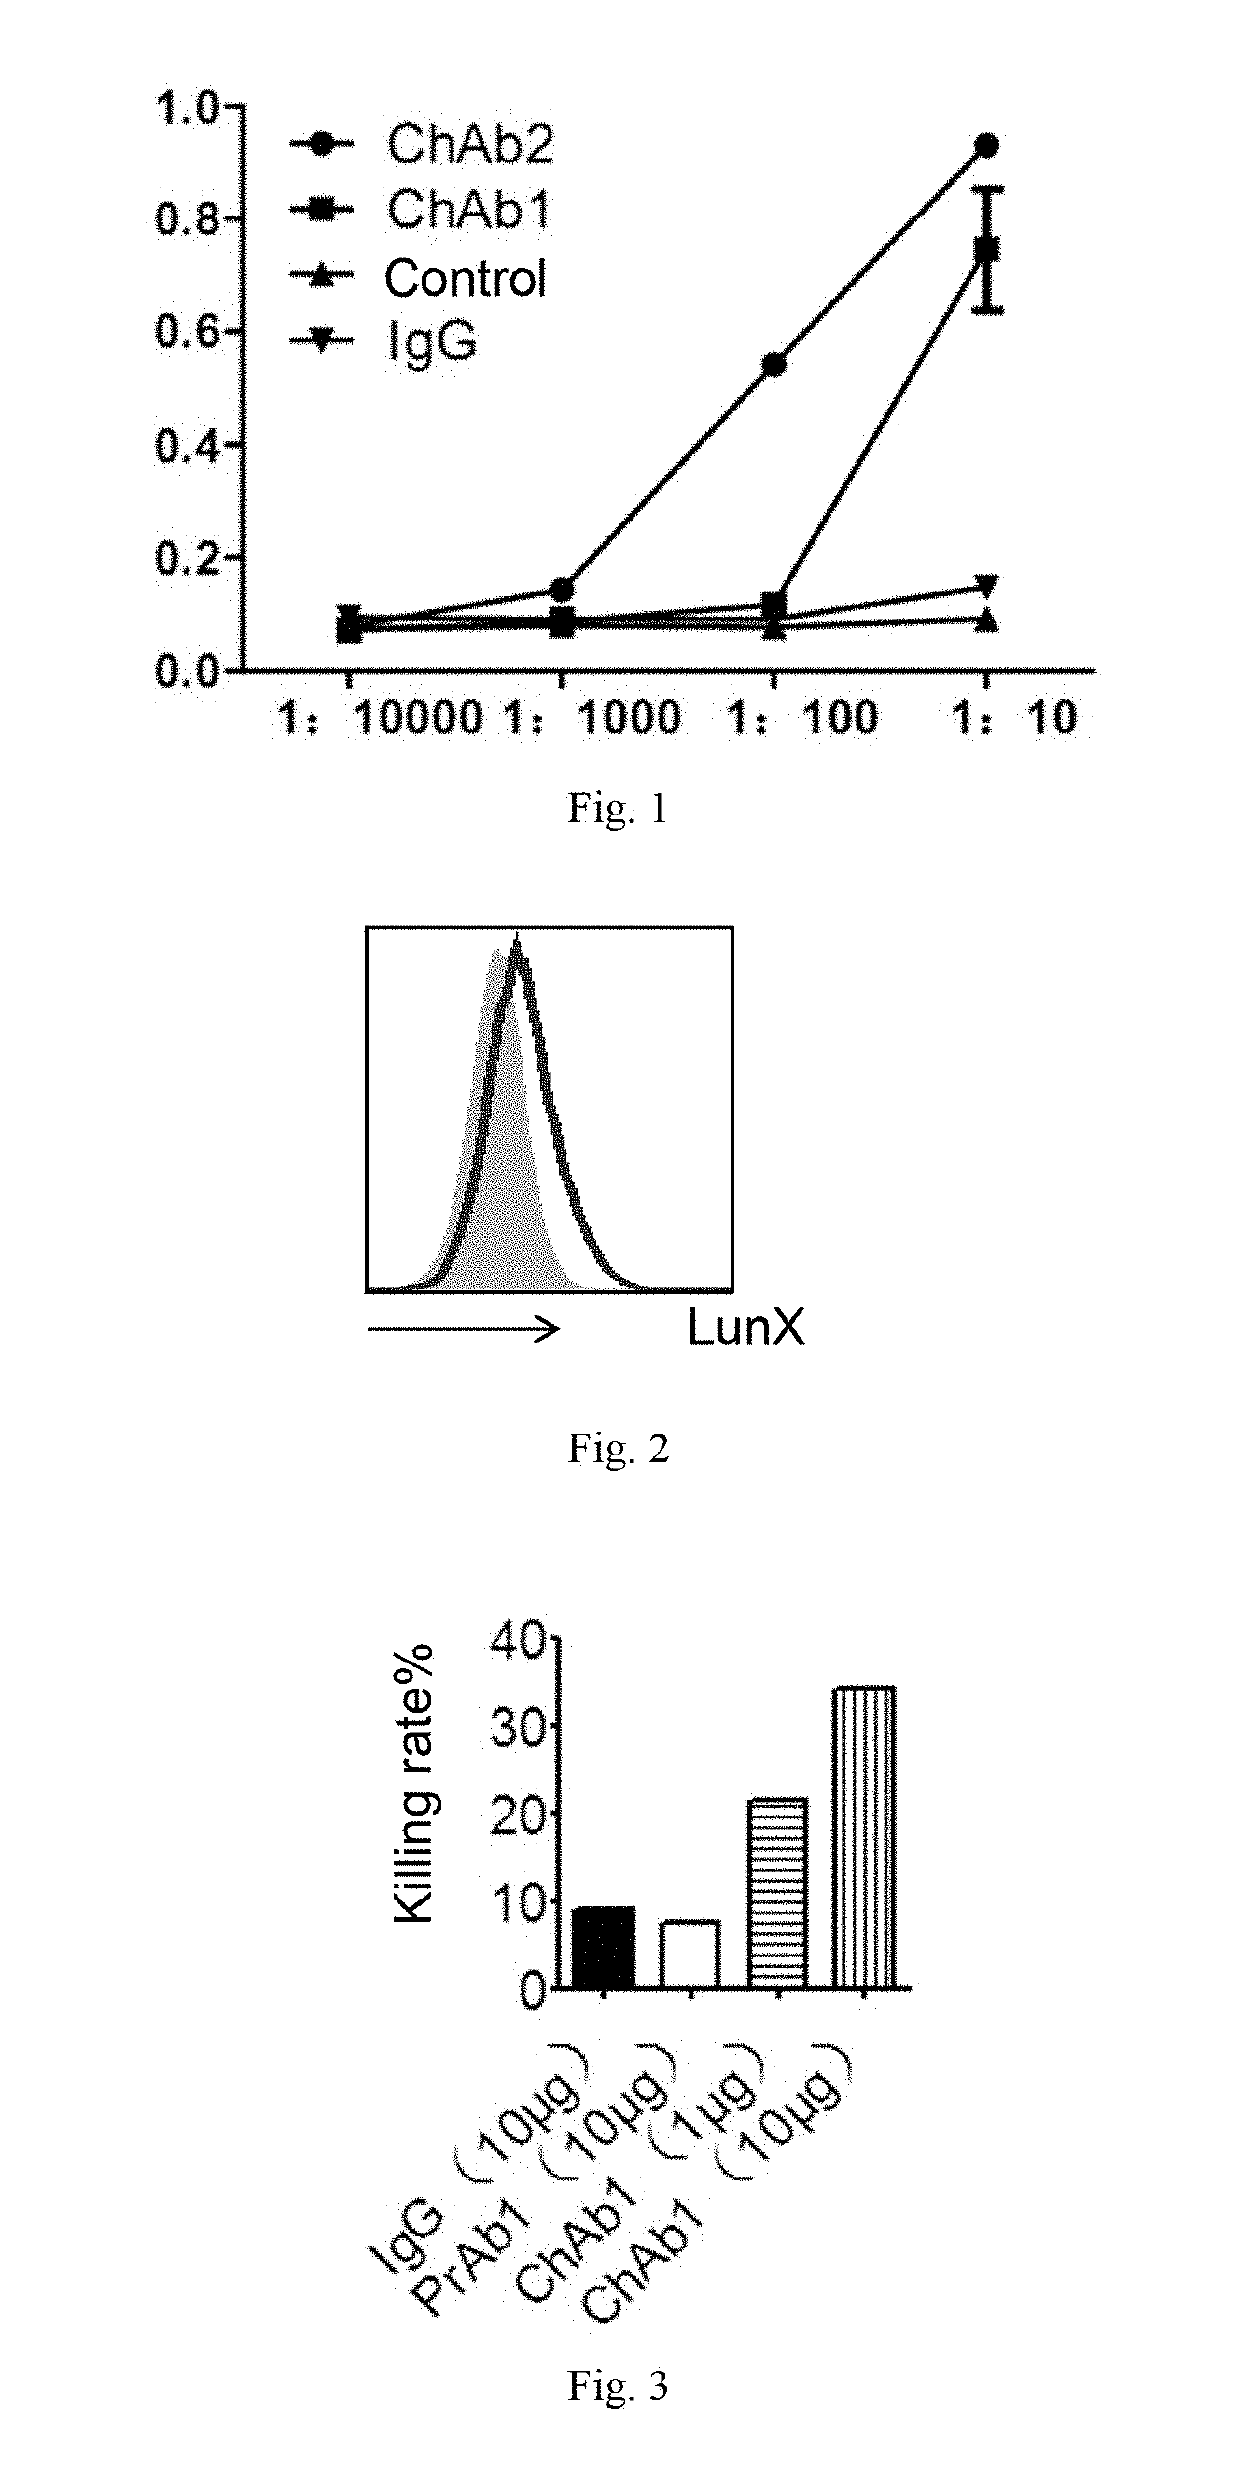 Antibody or antibody fragment capable of binding to lung-specific x protein and use thereof